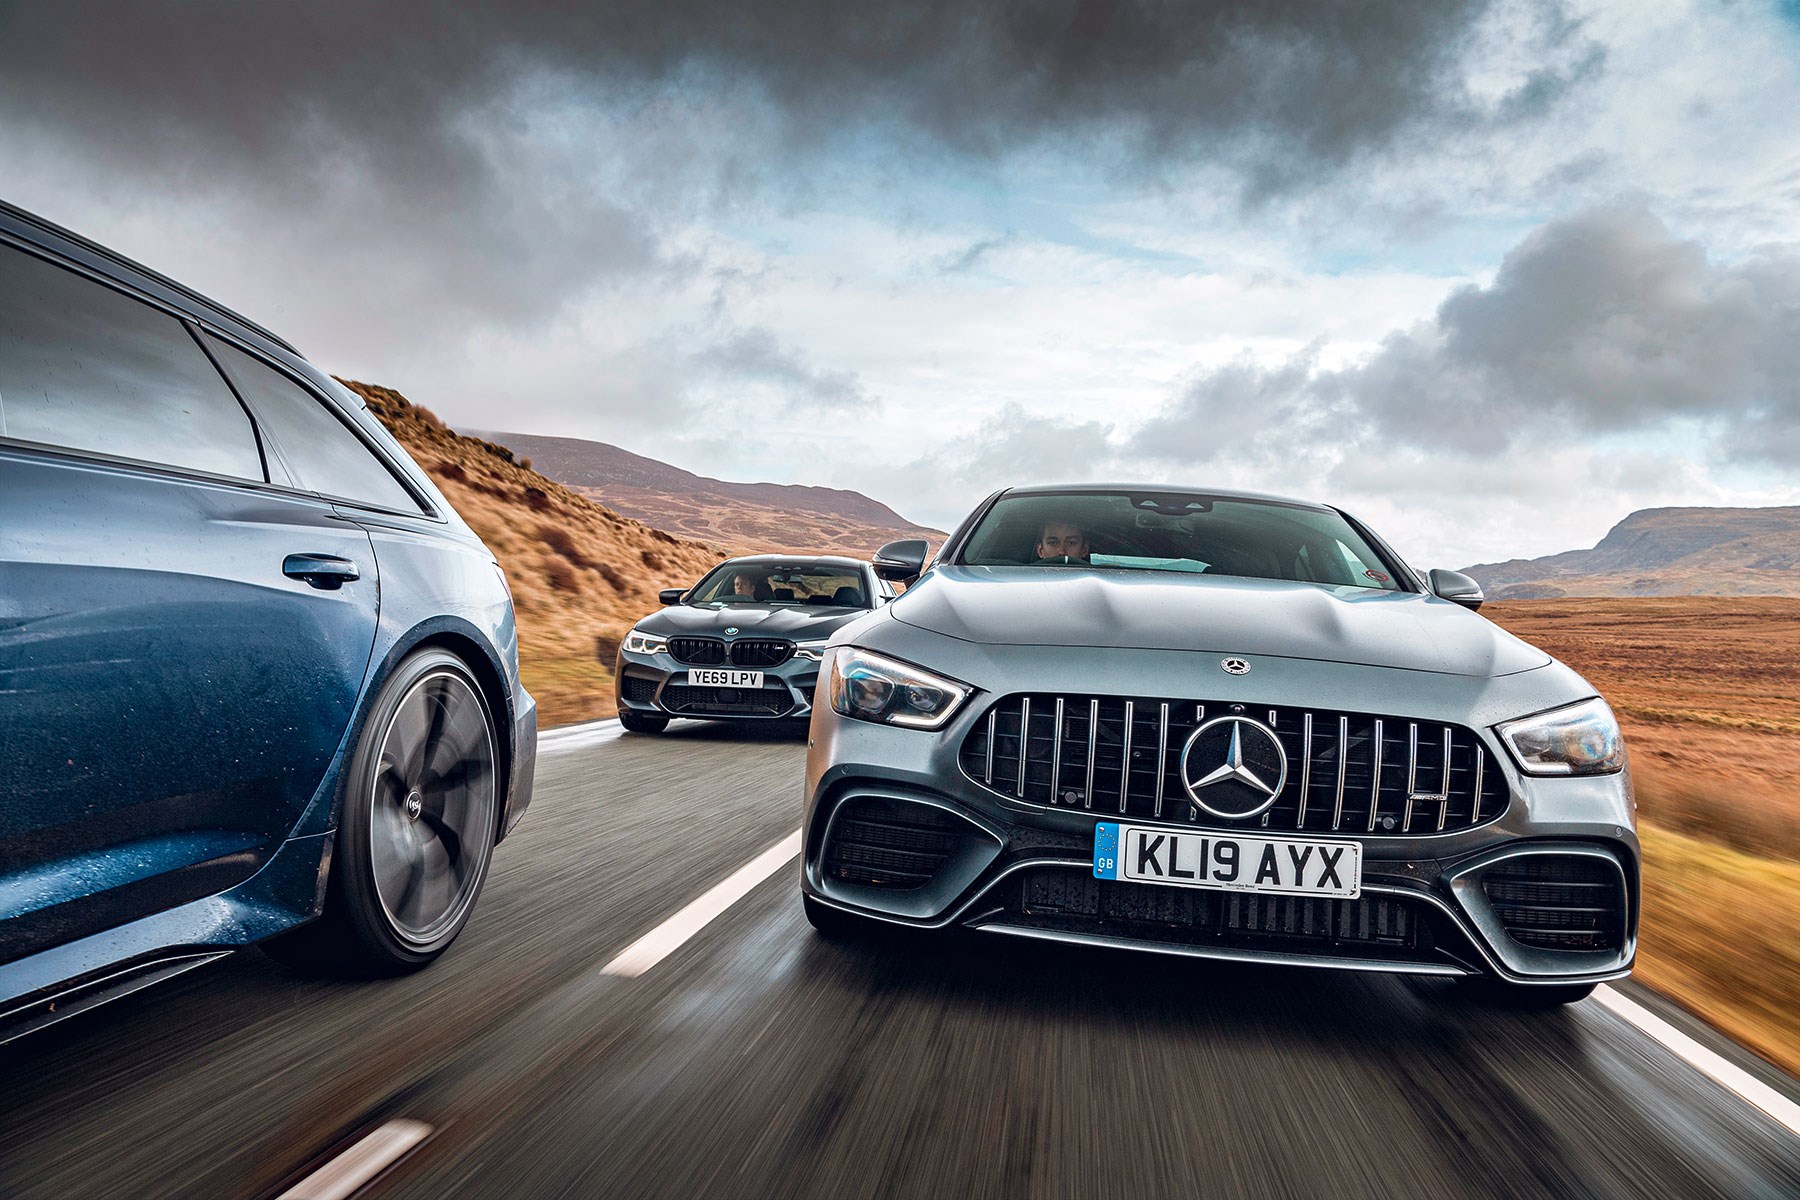 Thug life: Audi RS6 vs BMW M5 Competition vs Mercedes-AMG GT 4-Door review